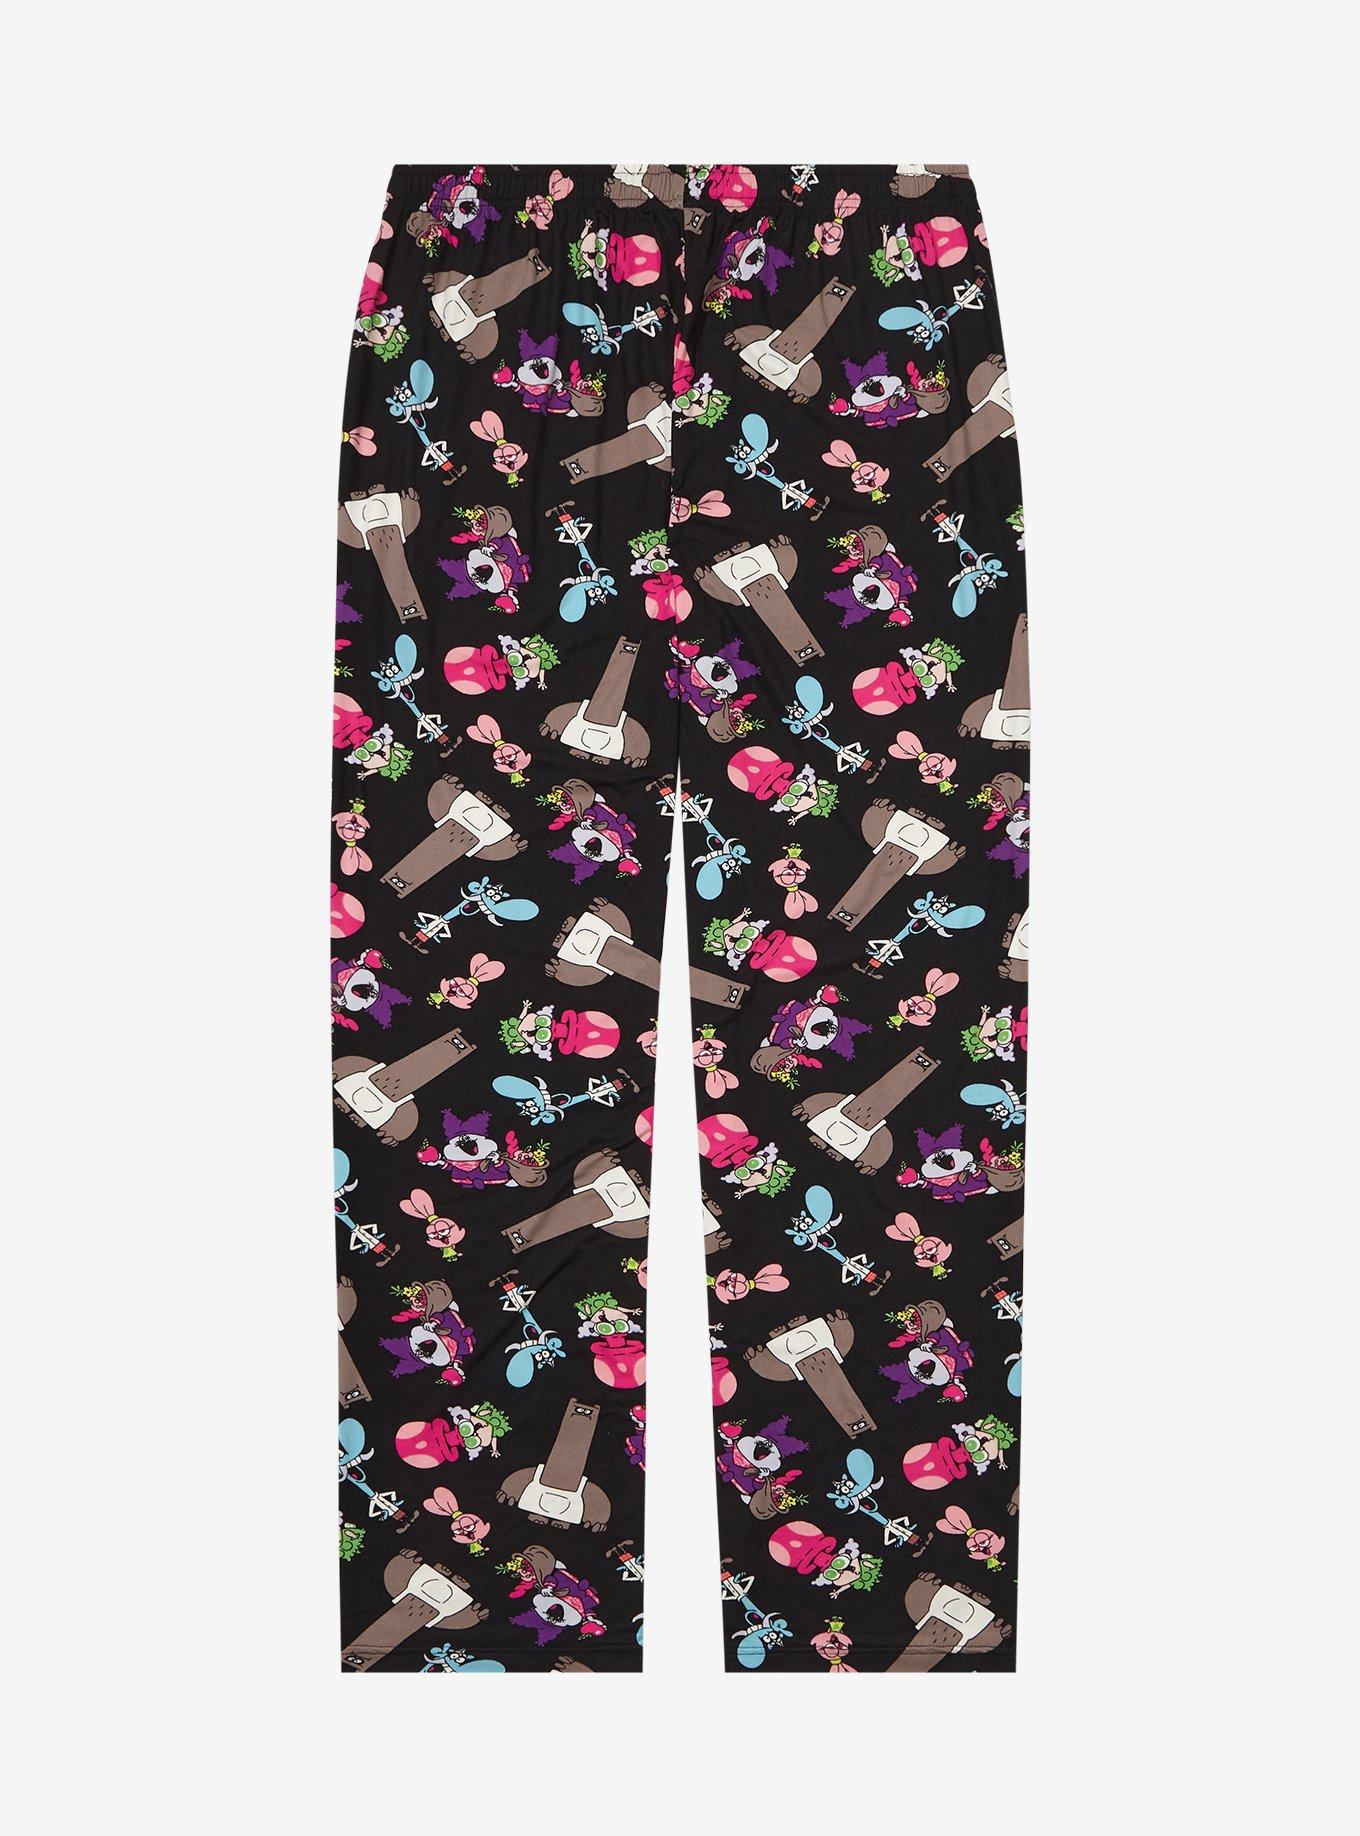 Chowder Characters Allover Print Sleep Pants - BoxLunch Exclusive, BLACK, alternate